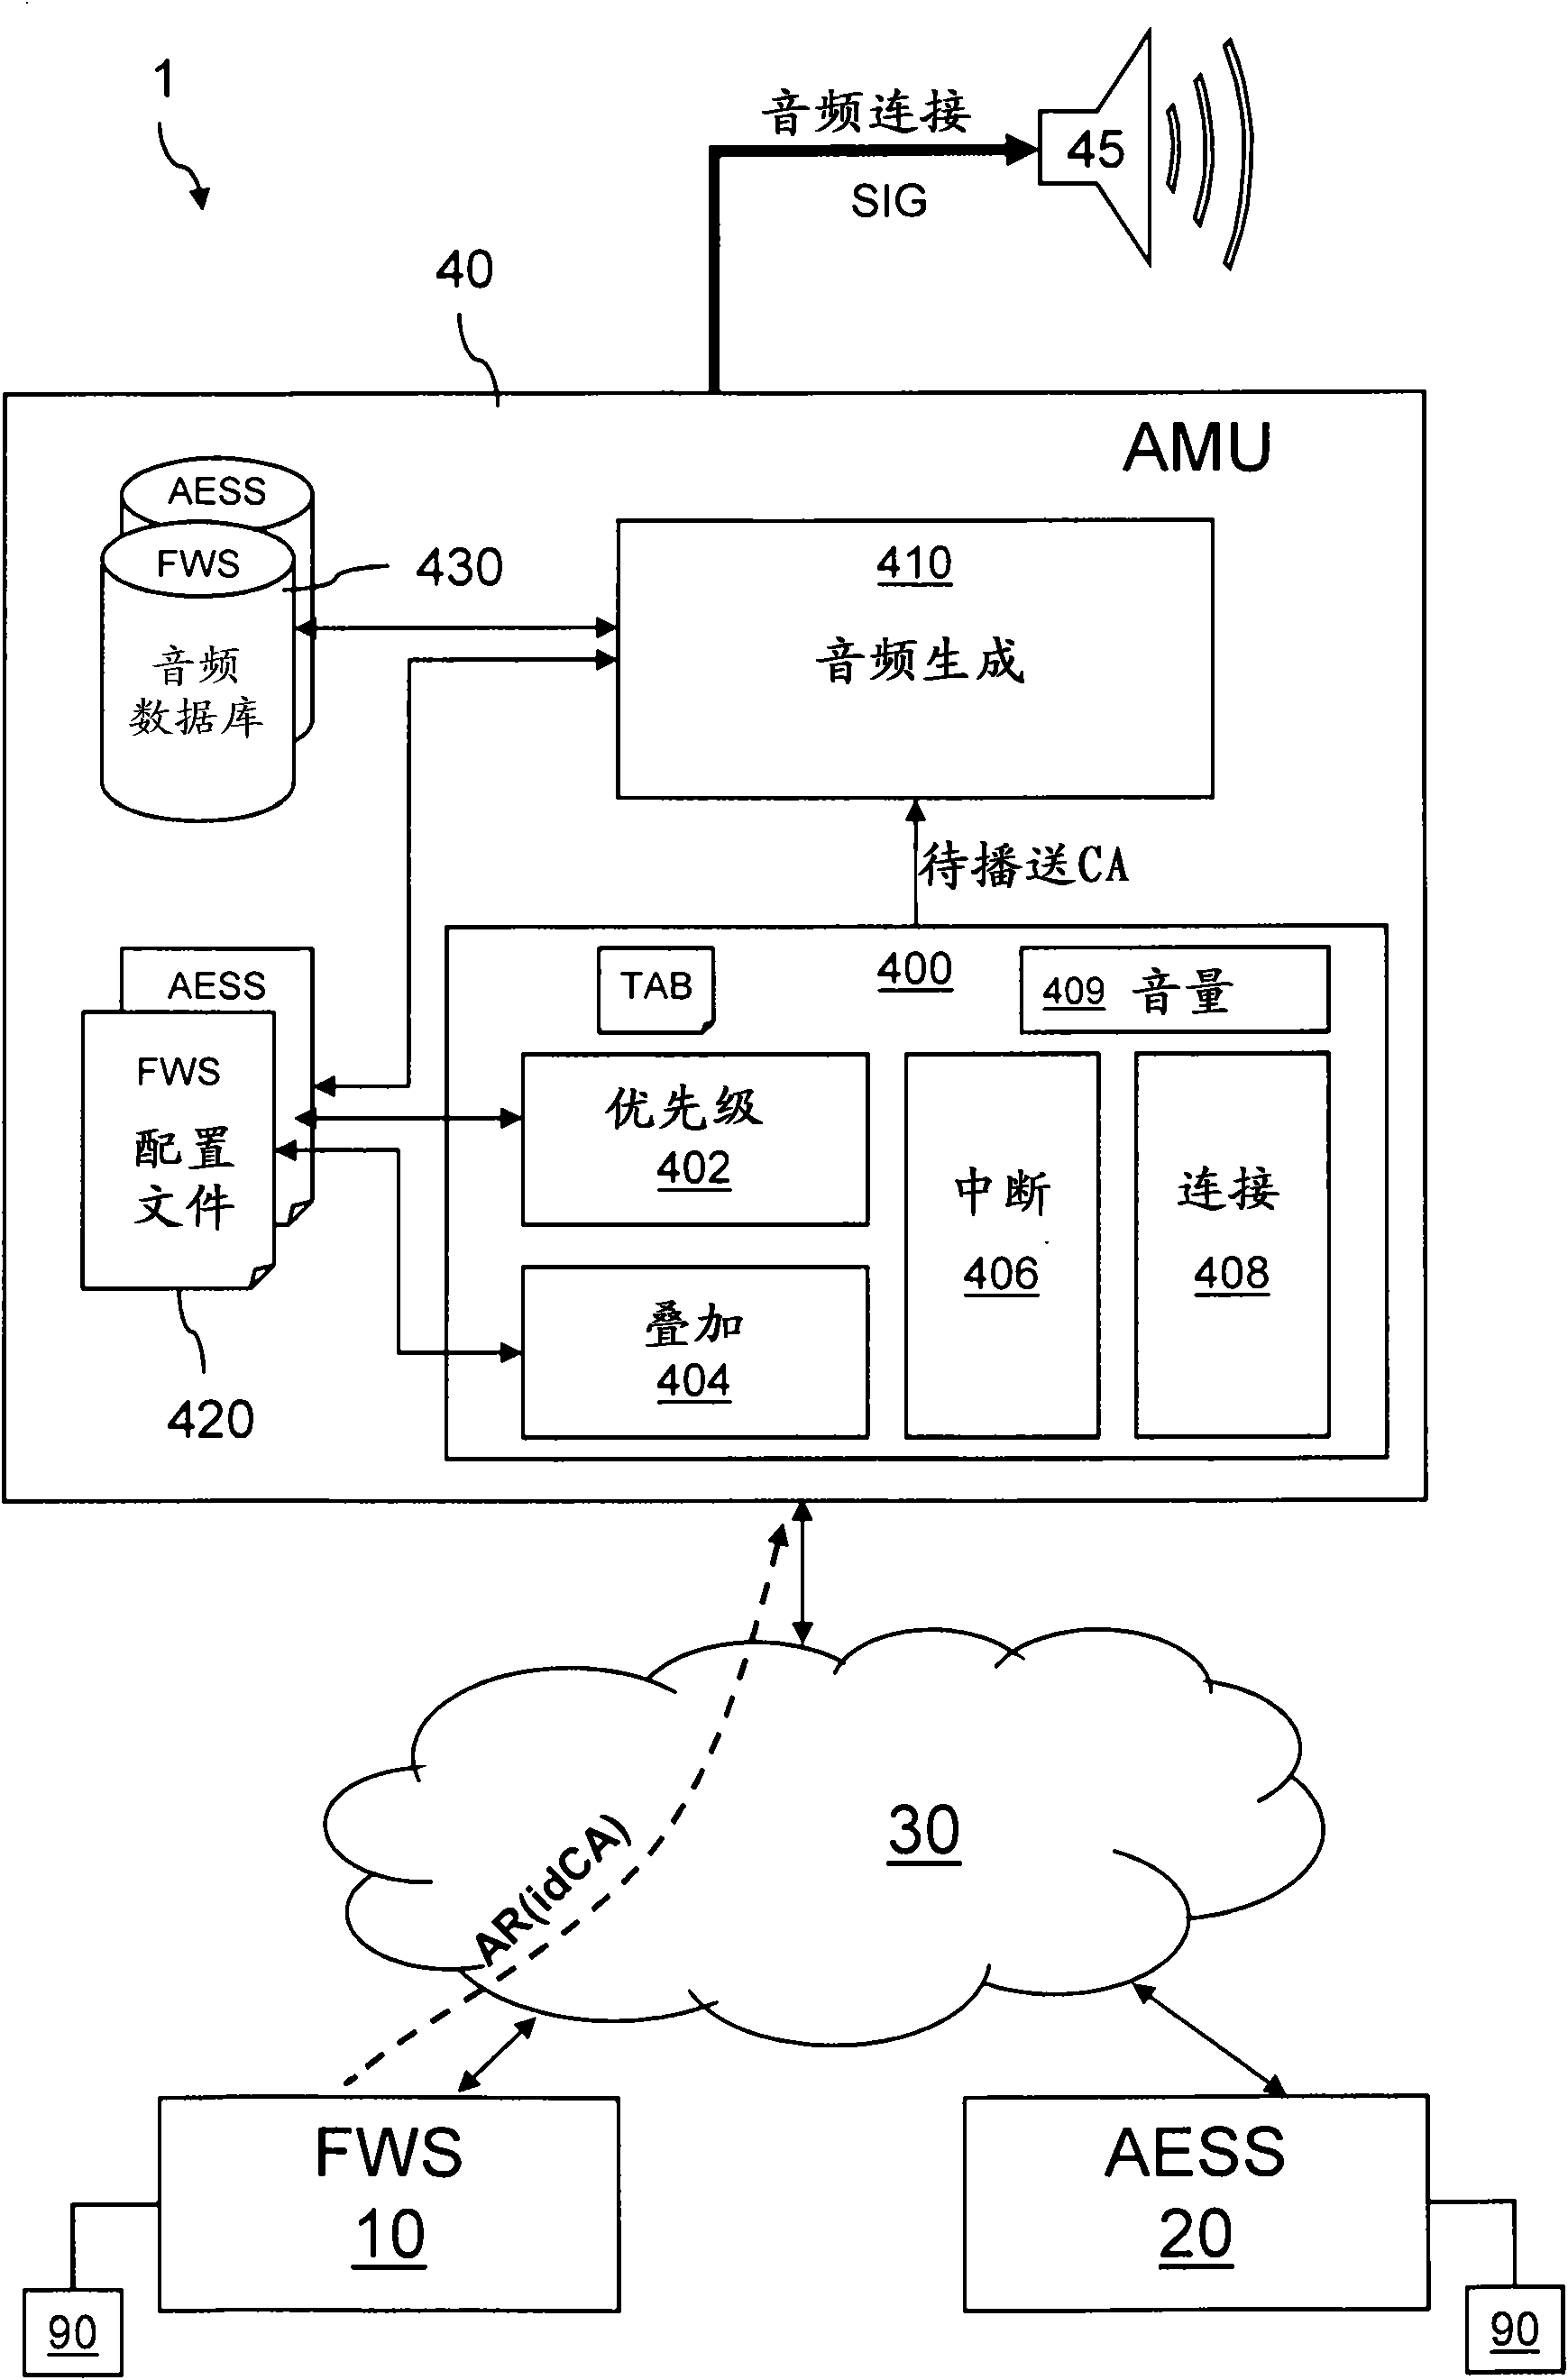 System and method for managing audio warning messages in an aircraft